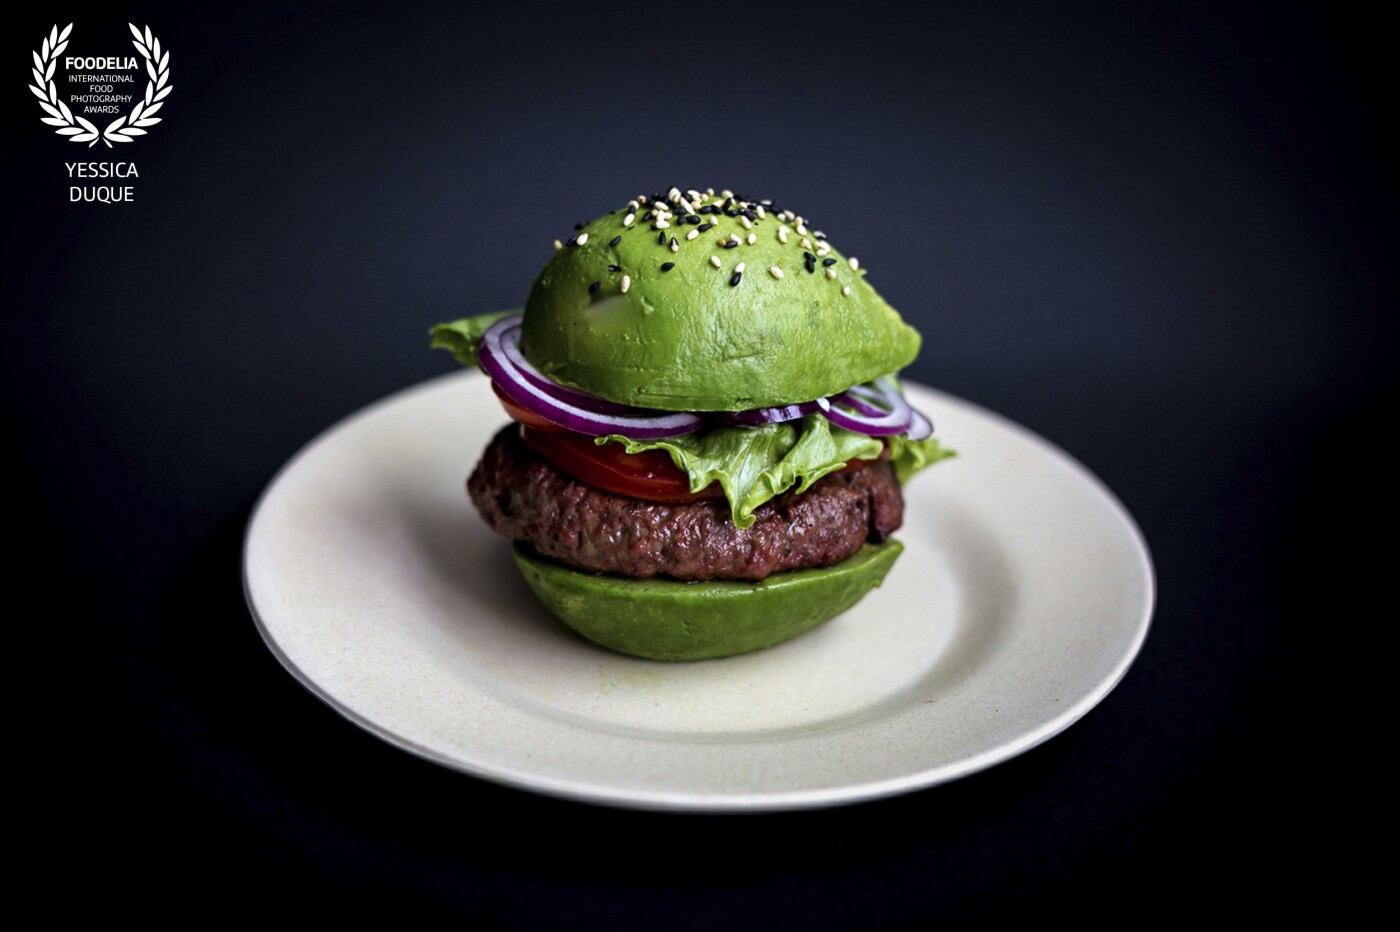 Angus Avocado Burger <br />
Best 2 ingredients in one dish!<br />
Camera: Canon 5D mark iii<br />
Lens: 50 mm <br />
Settings: ISO 400, 1/50 sec at ƒ/2.8, daylight